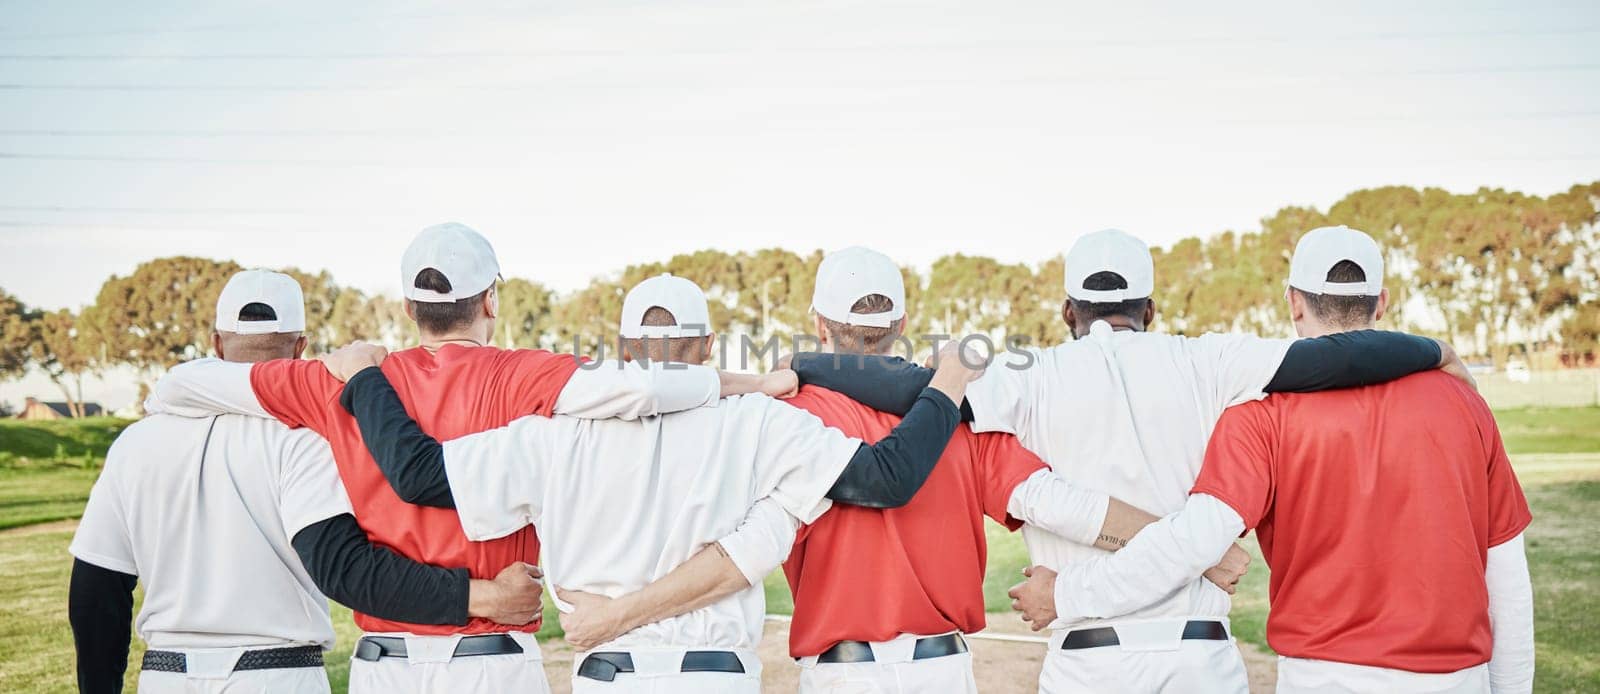 Back, teamwork and solidarity with a baseball group of people standing outdoor on a field for a game. Teamwork, support and training with friends or teammates in unity on a pitch for sports in summer by YuriArcurs